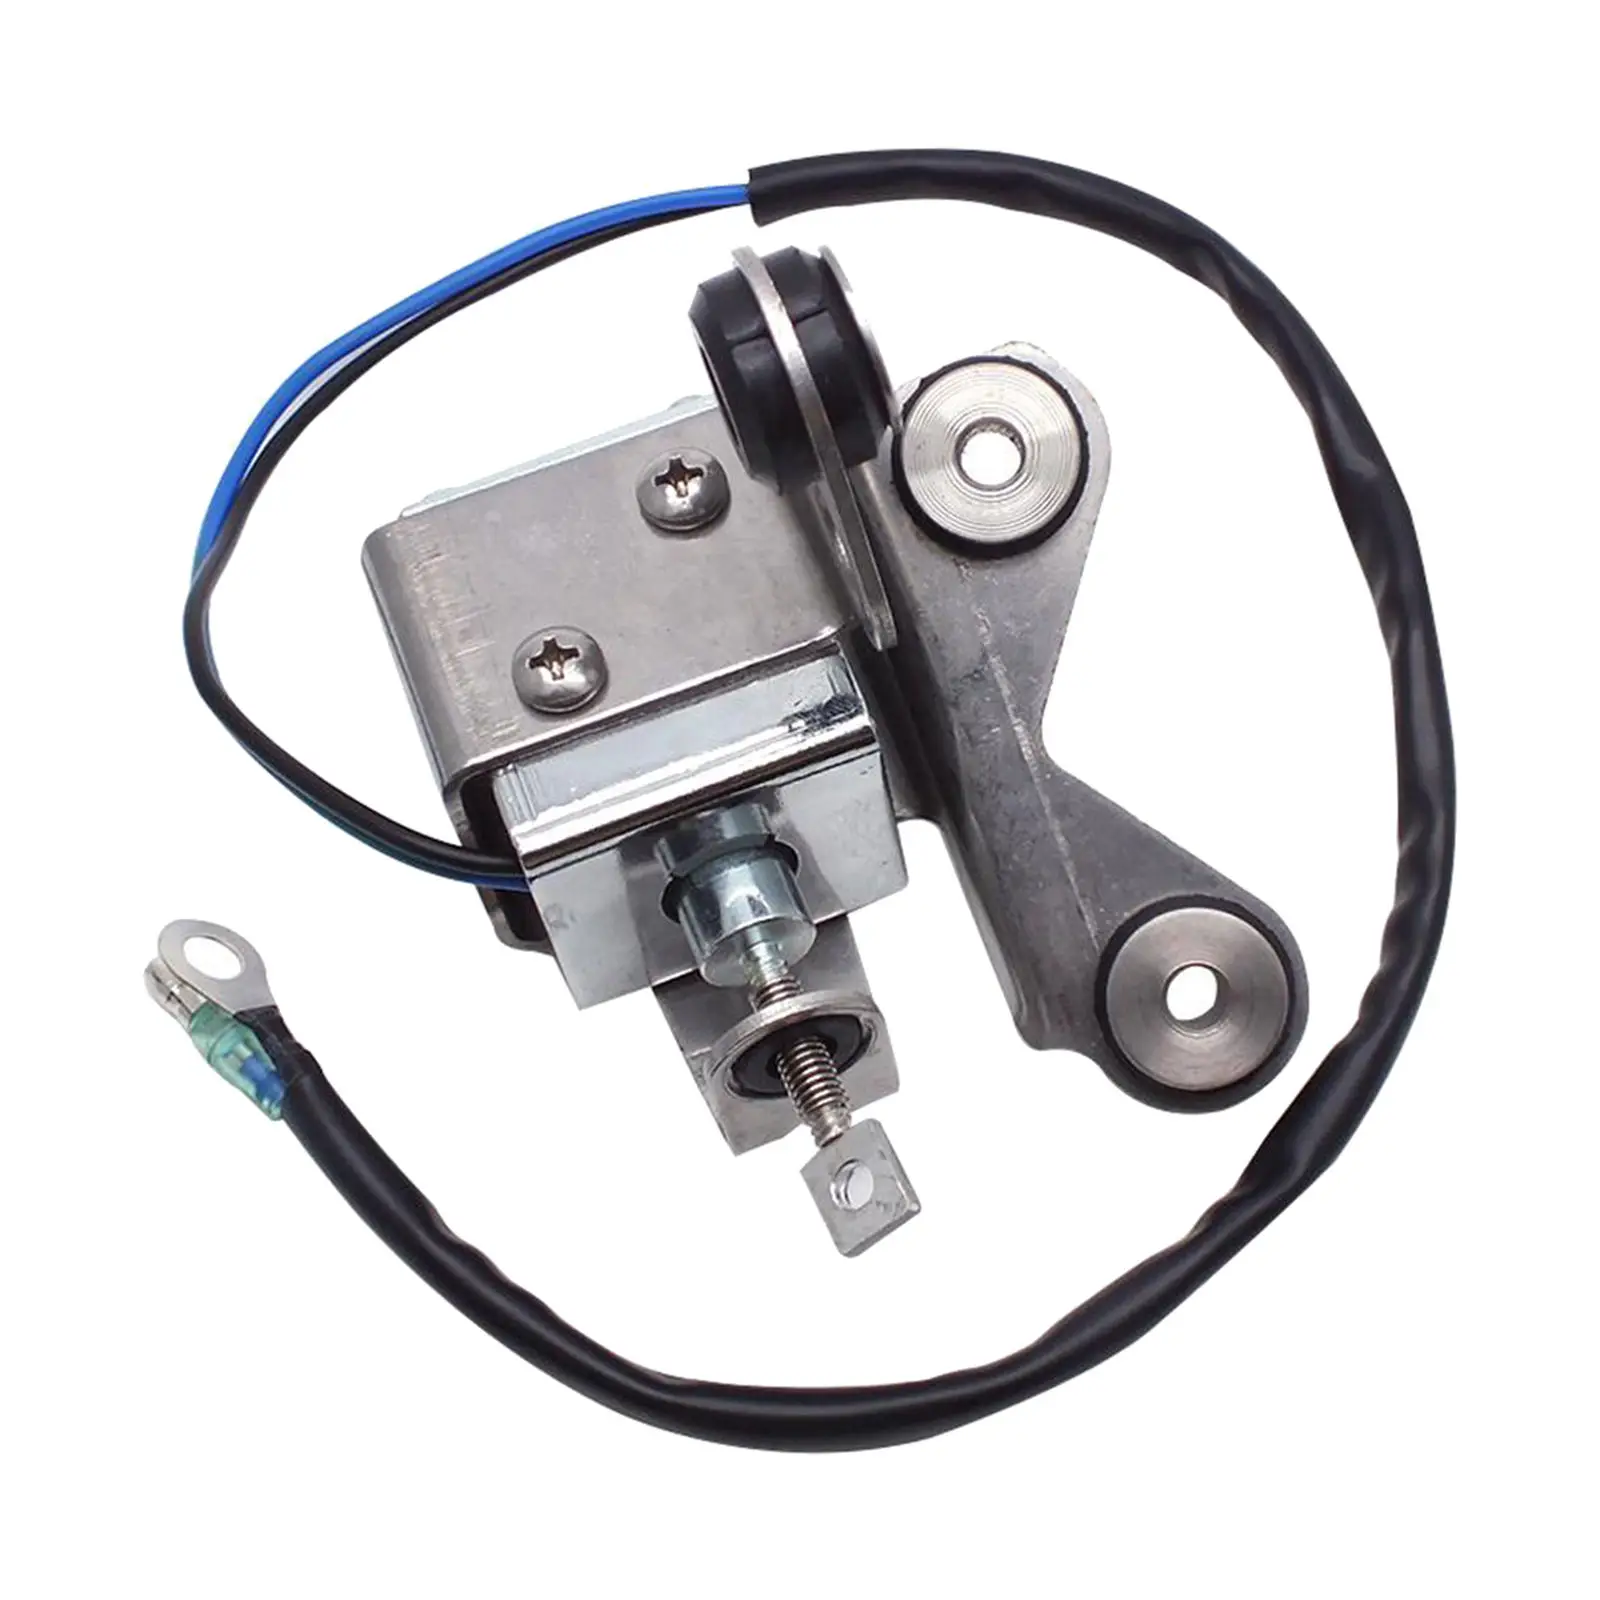 6J4-86111-00 Solenoid Coil for Yamaha Engines Spare Parts Professional Easy to Install